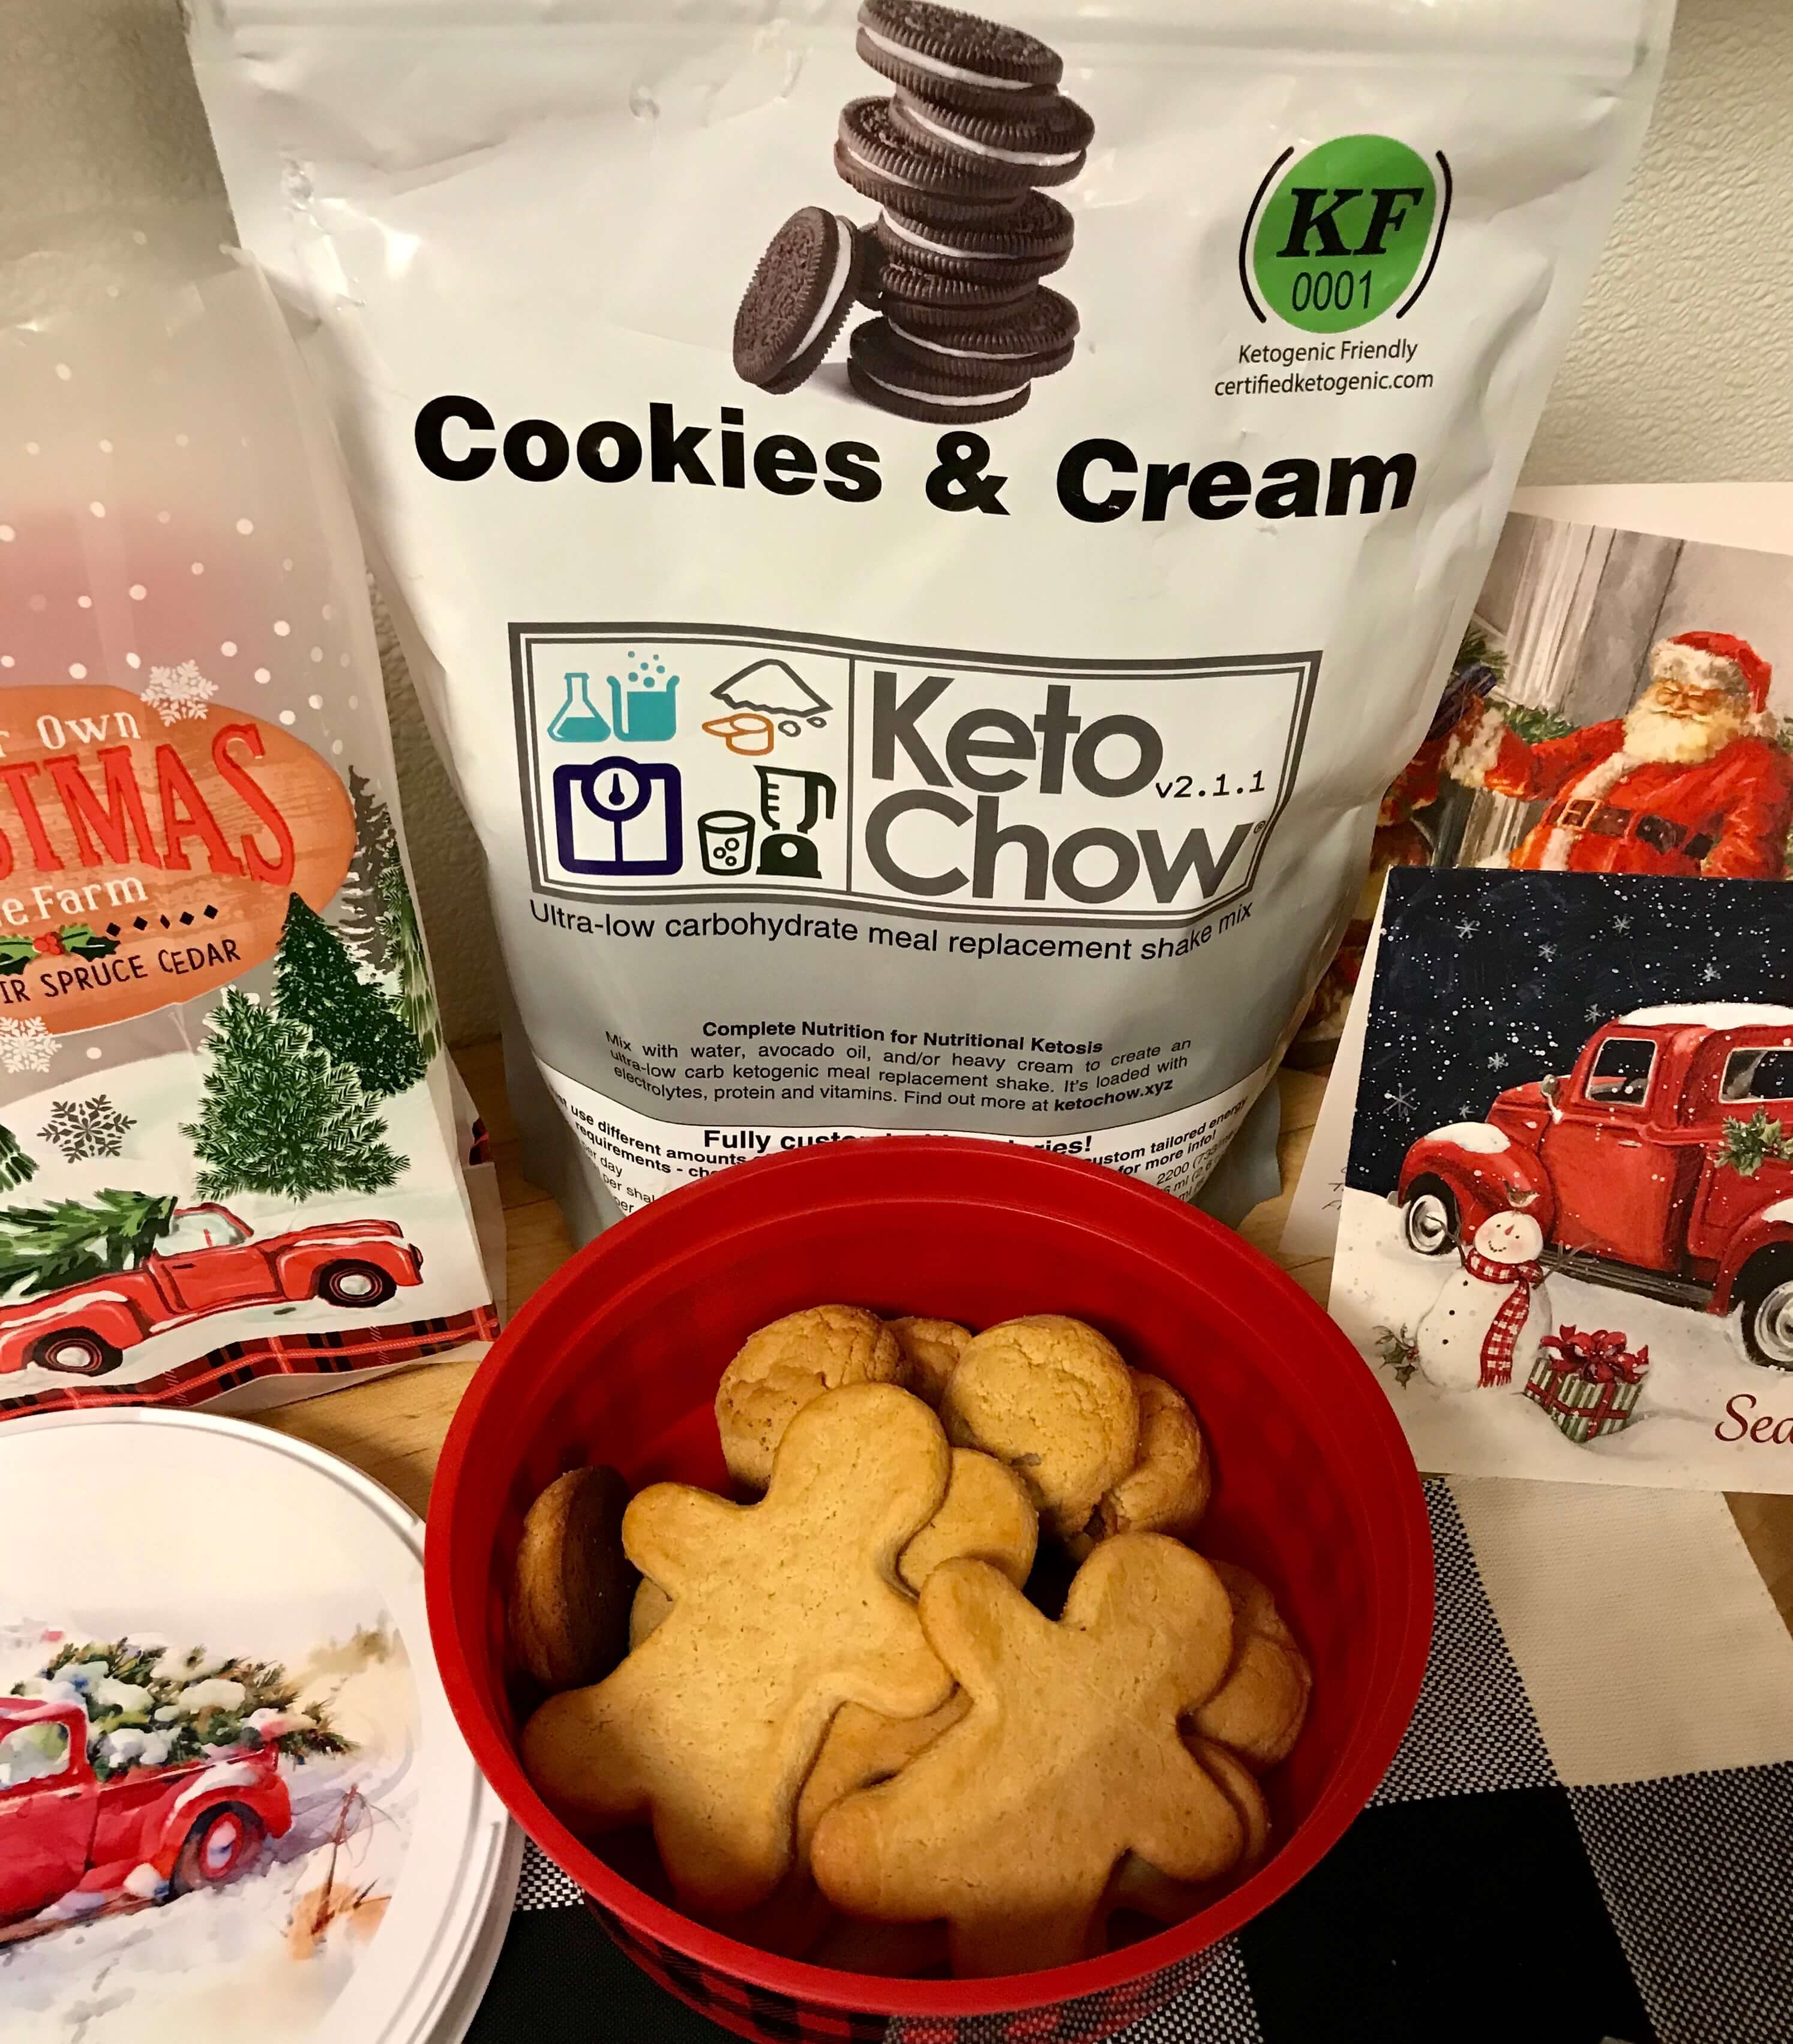 Soft Baked Keto Chow Cookies and Cream Cookies